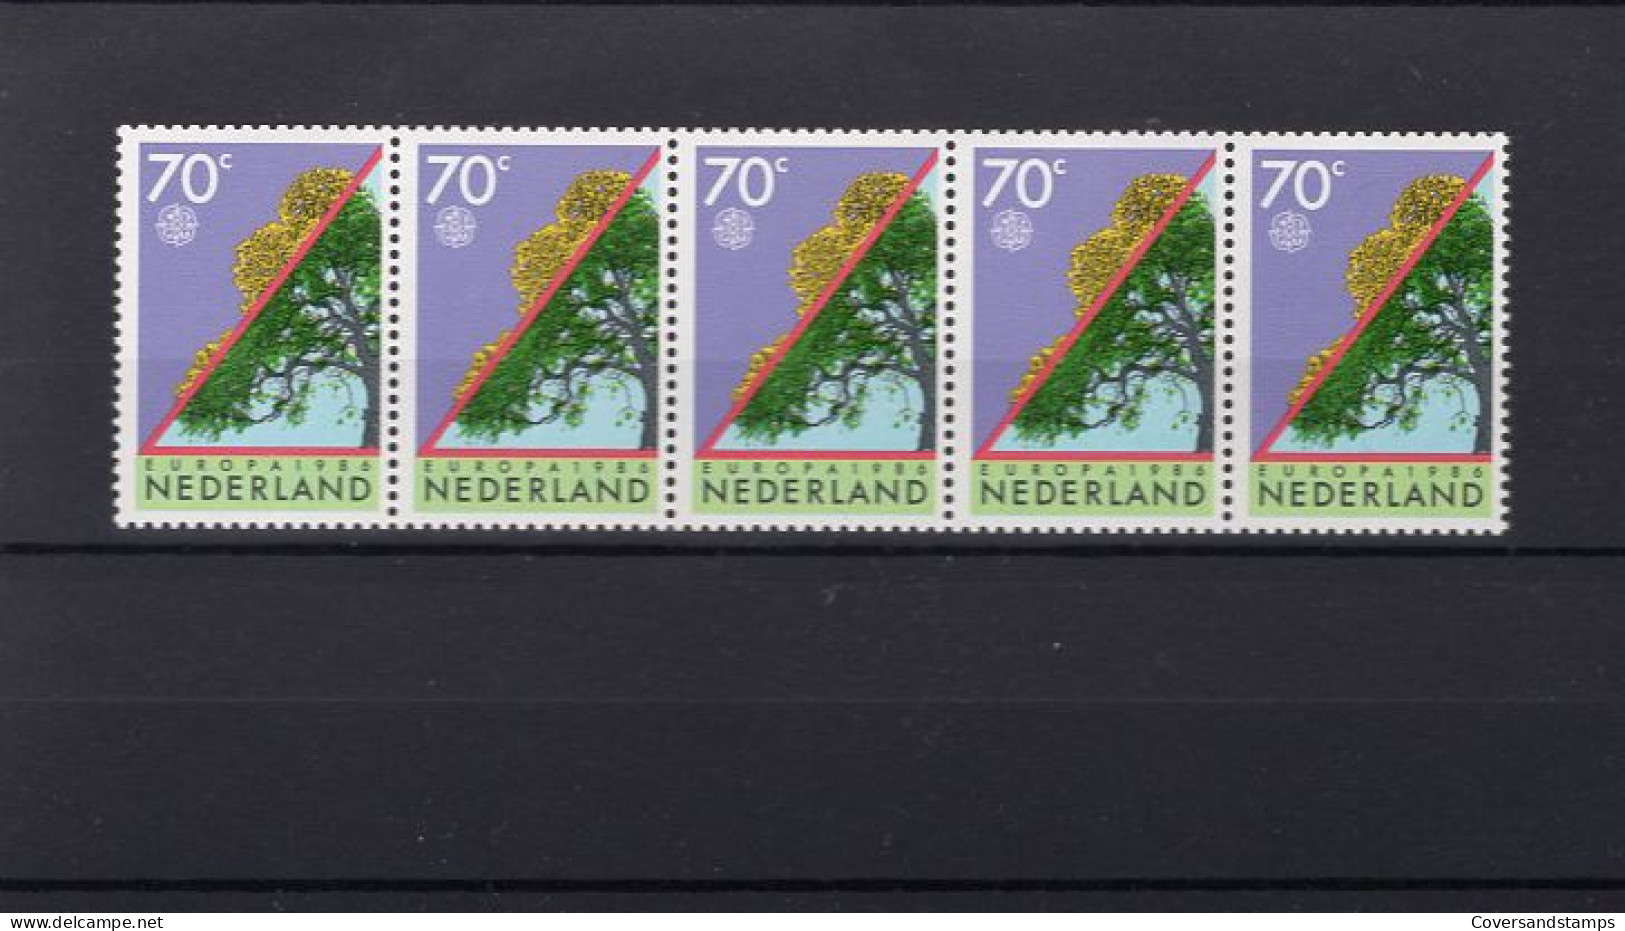  Netherlands - NVPH 1354 In Strips Of 5, Number 00115  ** MNH - 1986